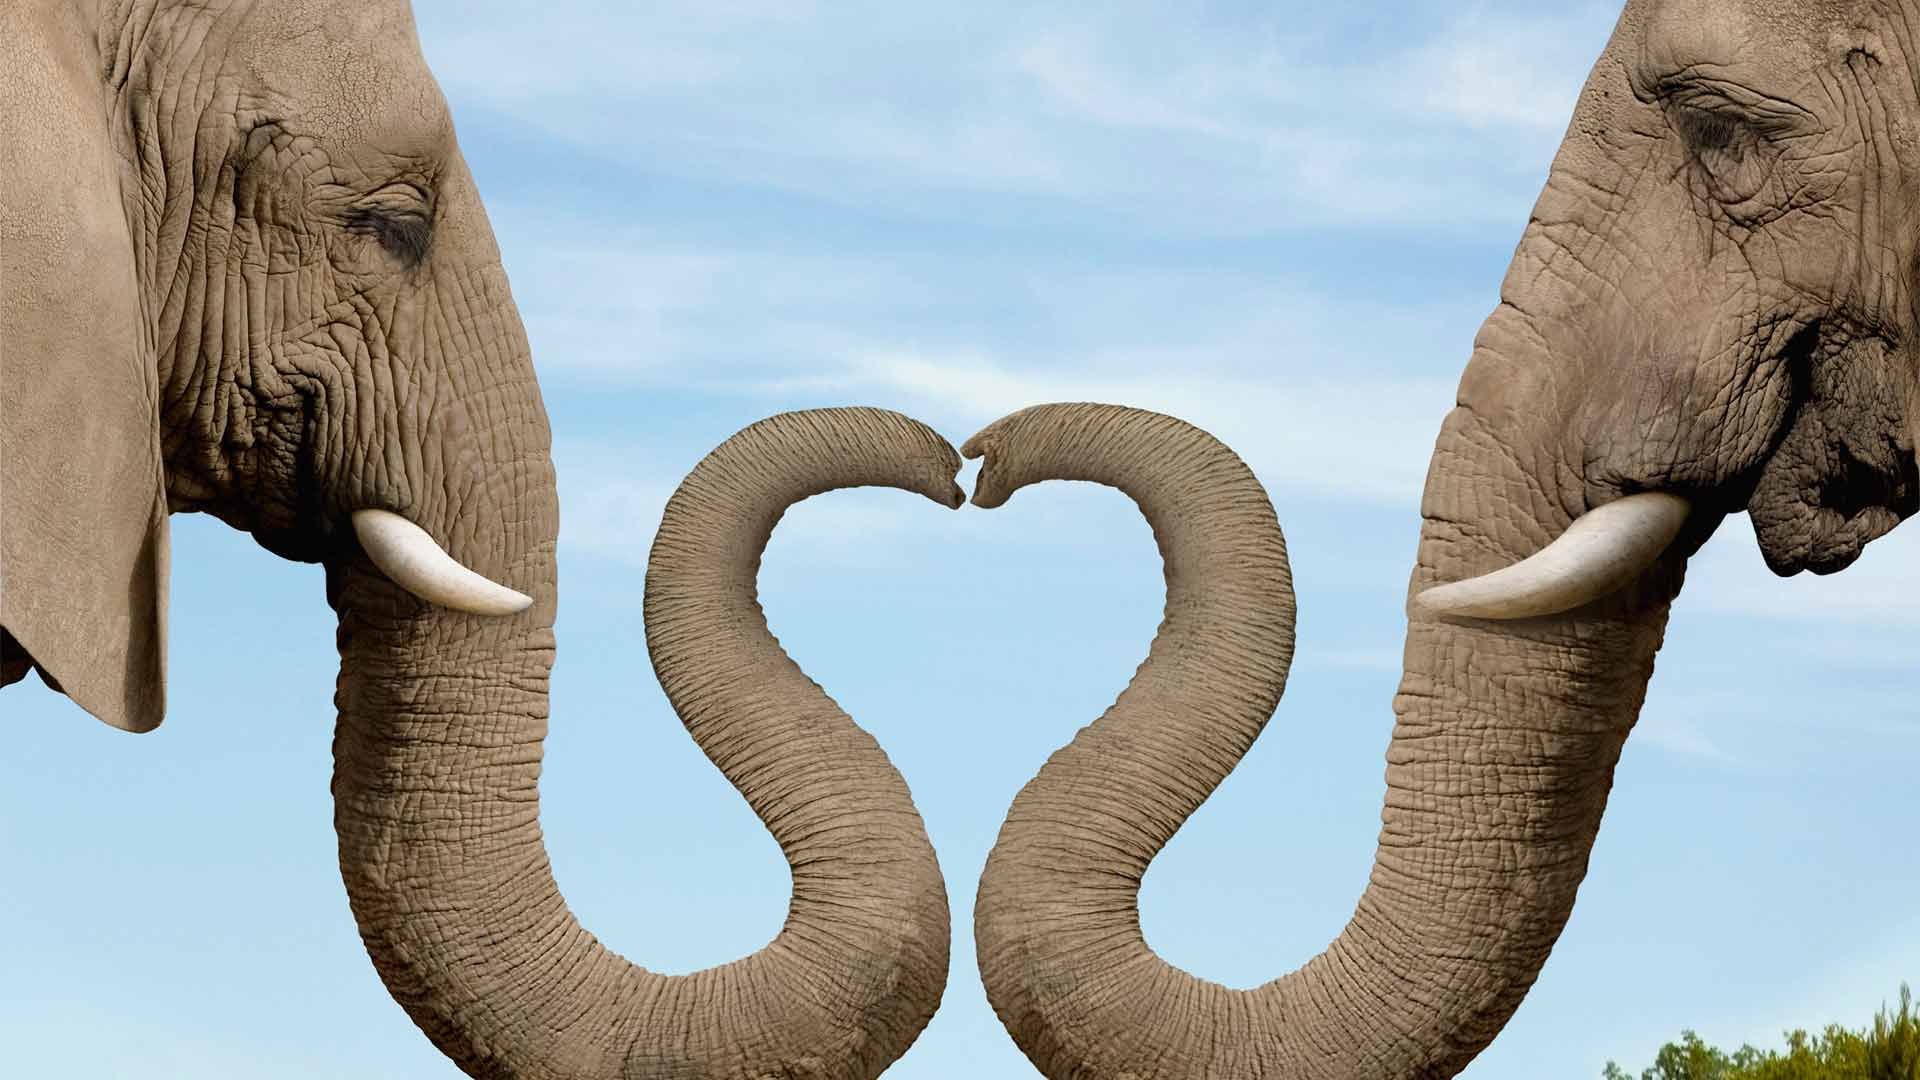 Cool Elephant Wallpapers